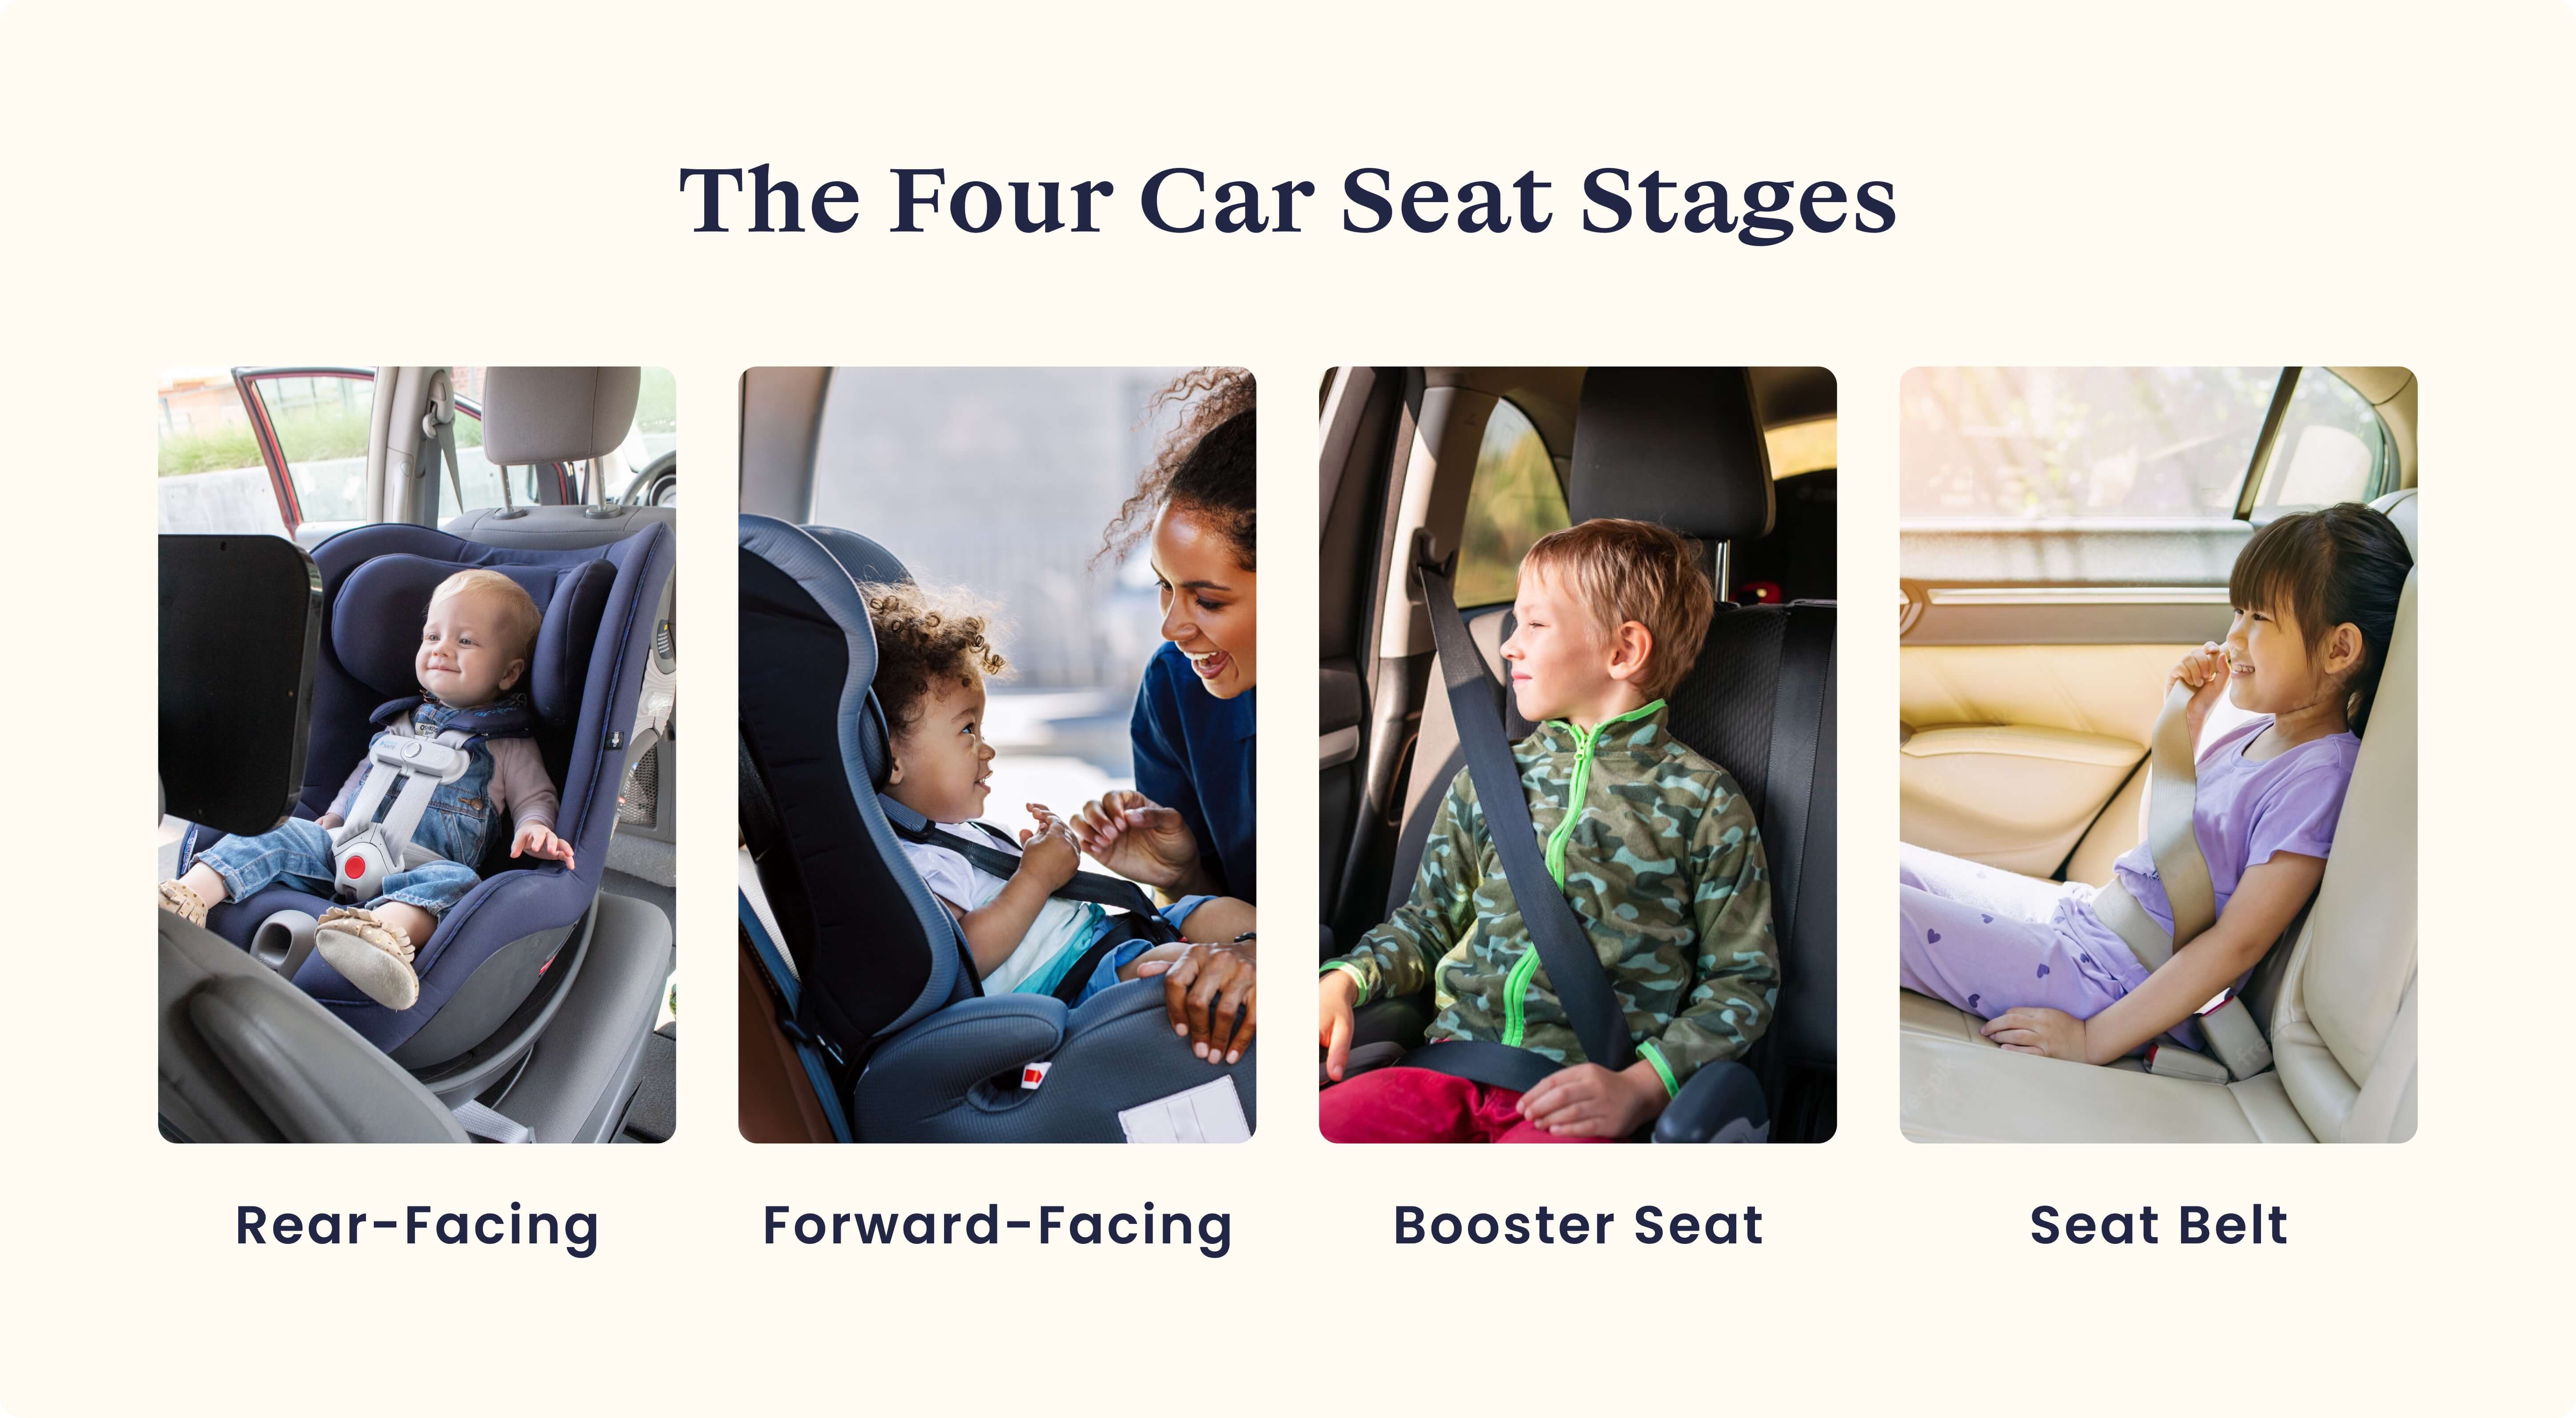 the four stages of car seat safety: rear-facing, forward-facing, booster seat, seat belt 